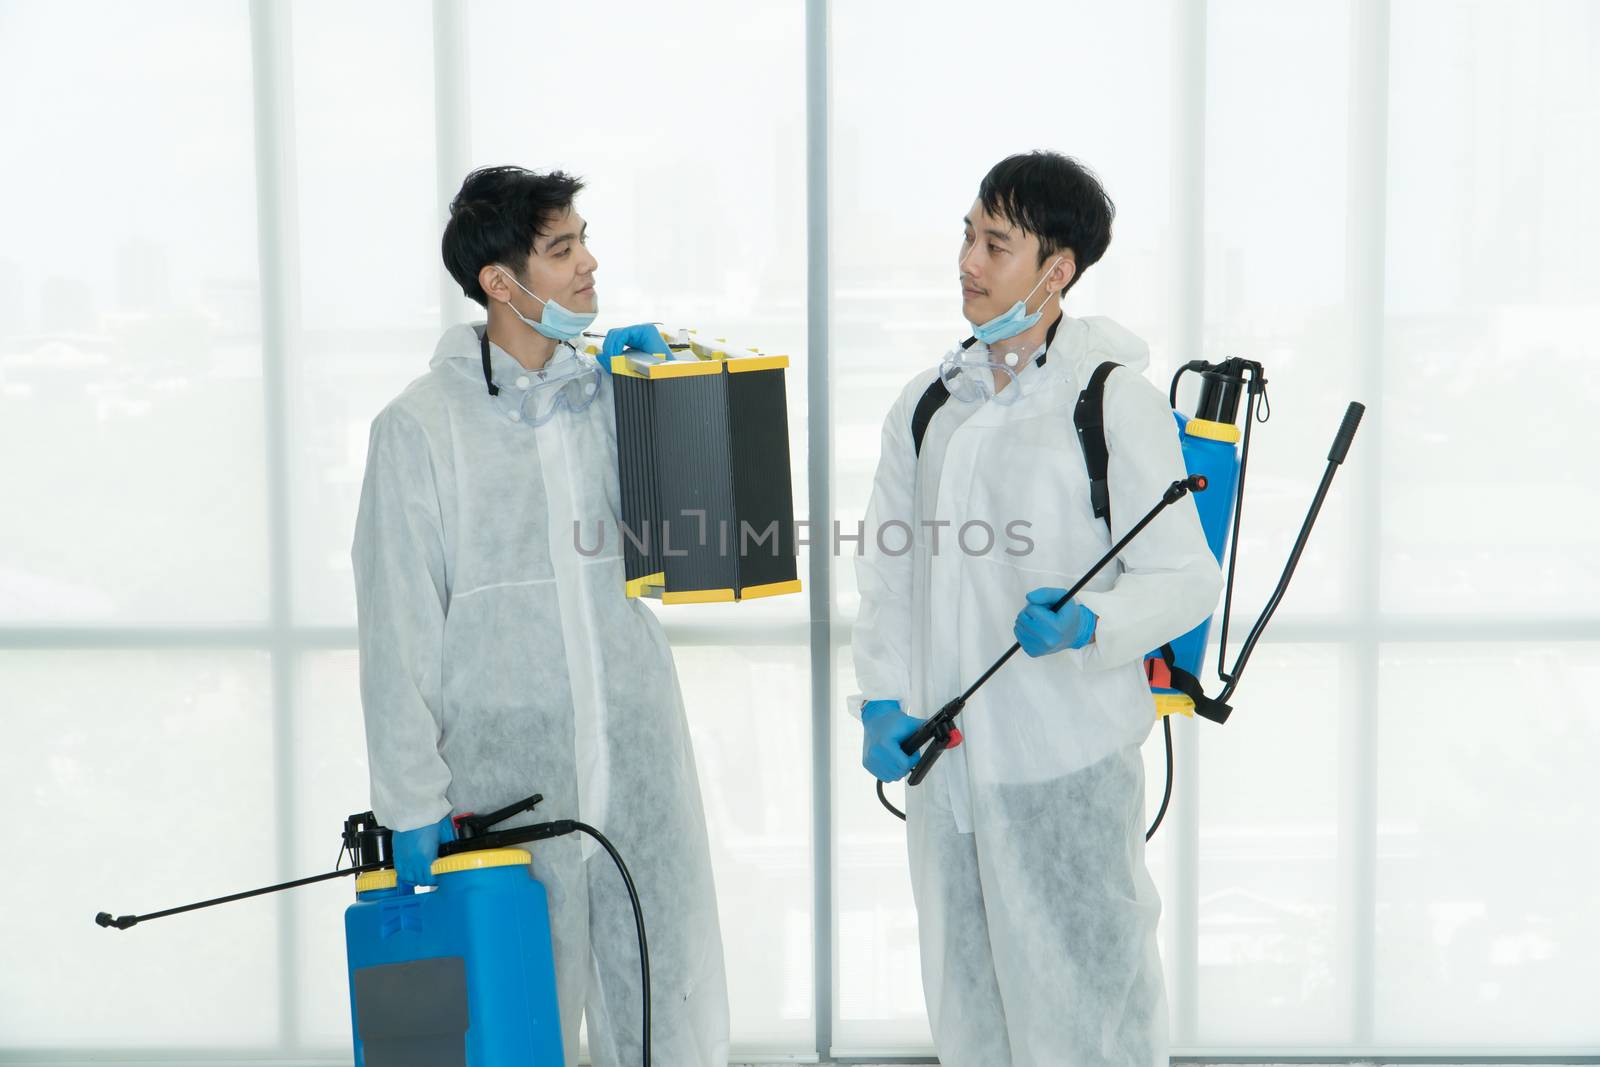 Professional  male worker In protective clothing and masks are spraying disinfectants, cleaning, controlling virus and bacteria in the contaminated area After the spread of coronavirus or COVID-19